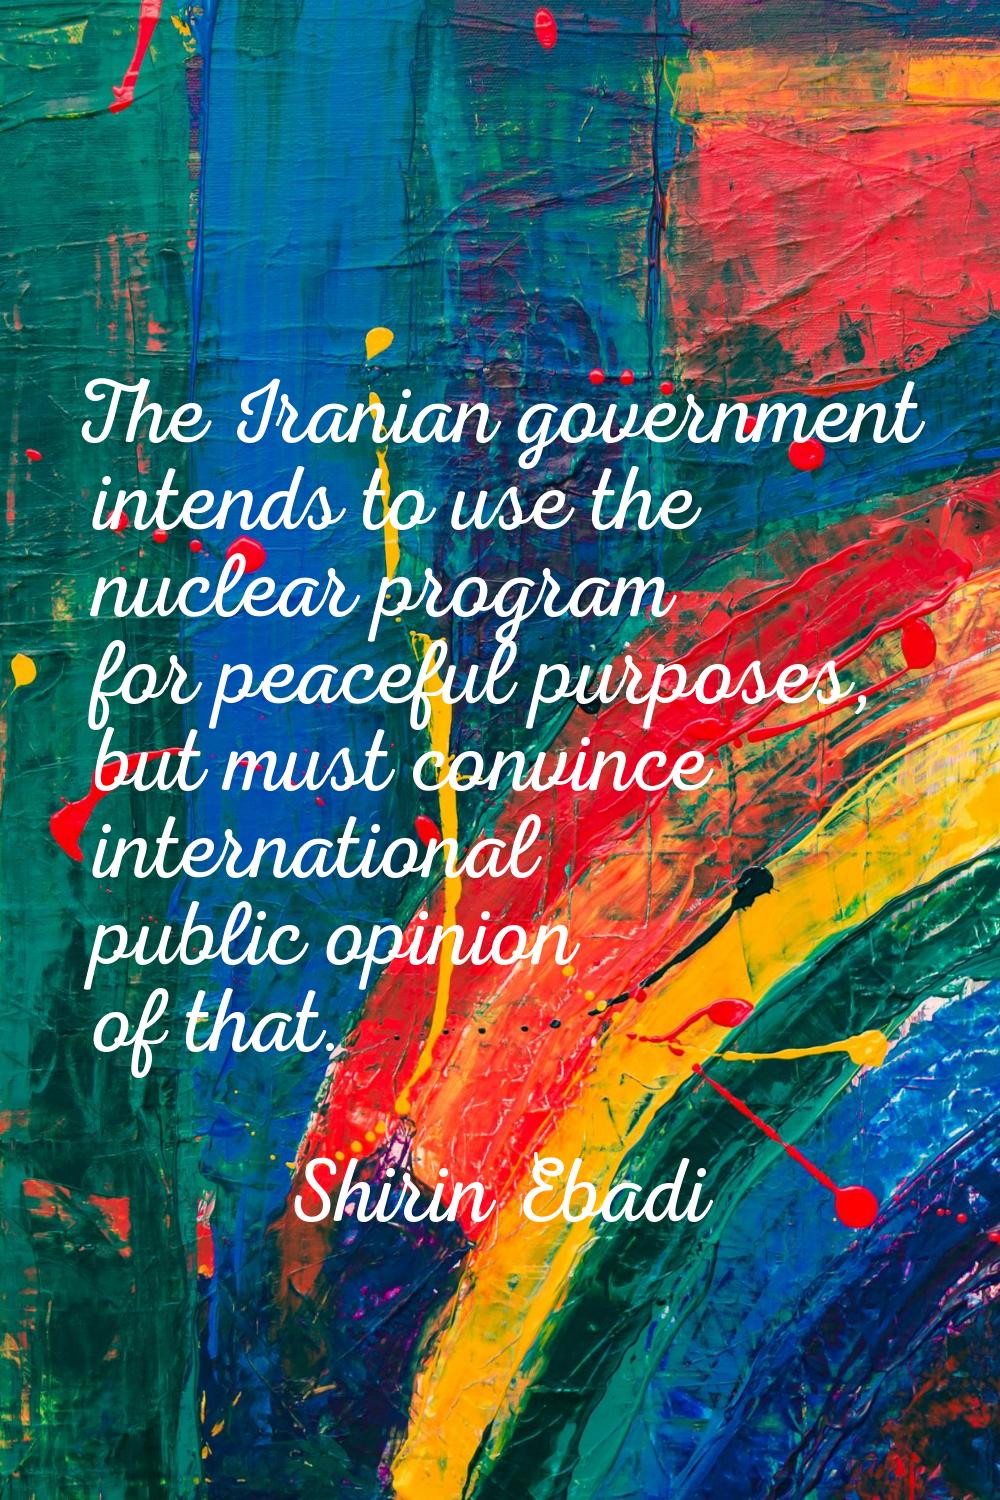 The Iranian government intends to use the nuclear program for peaceful purposes, but must convince 